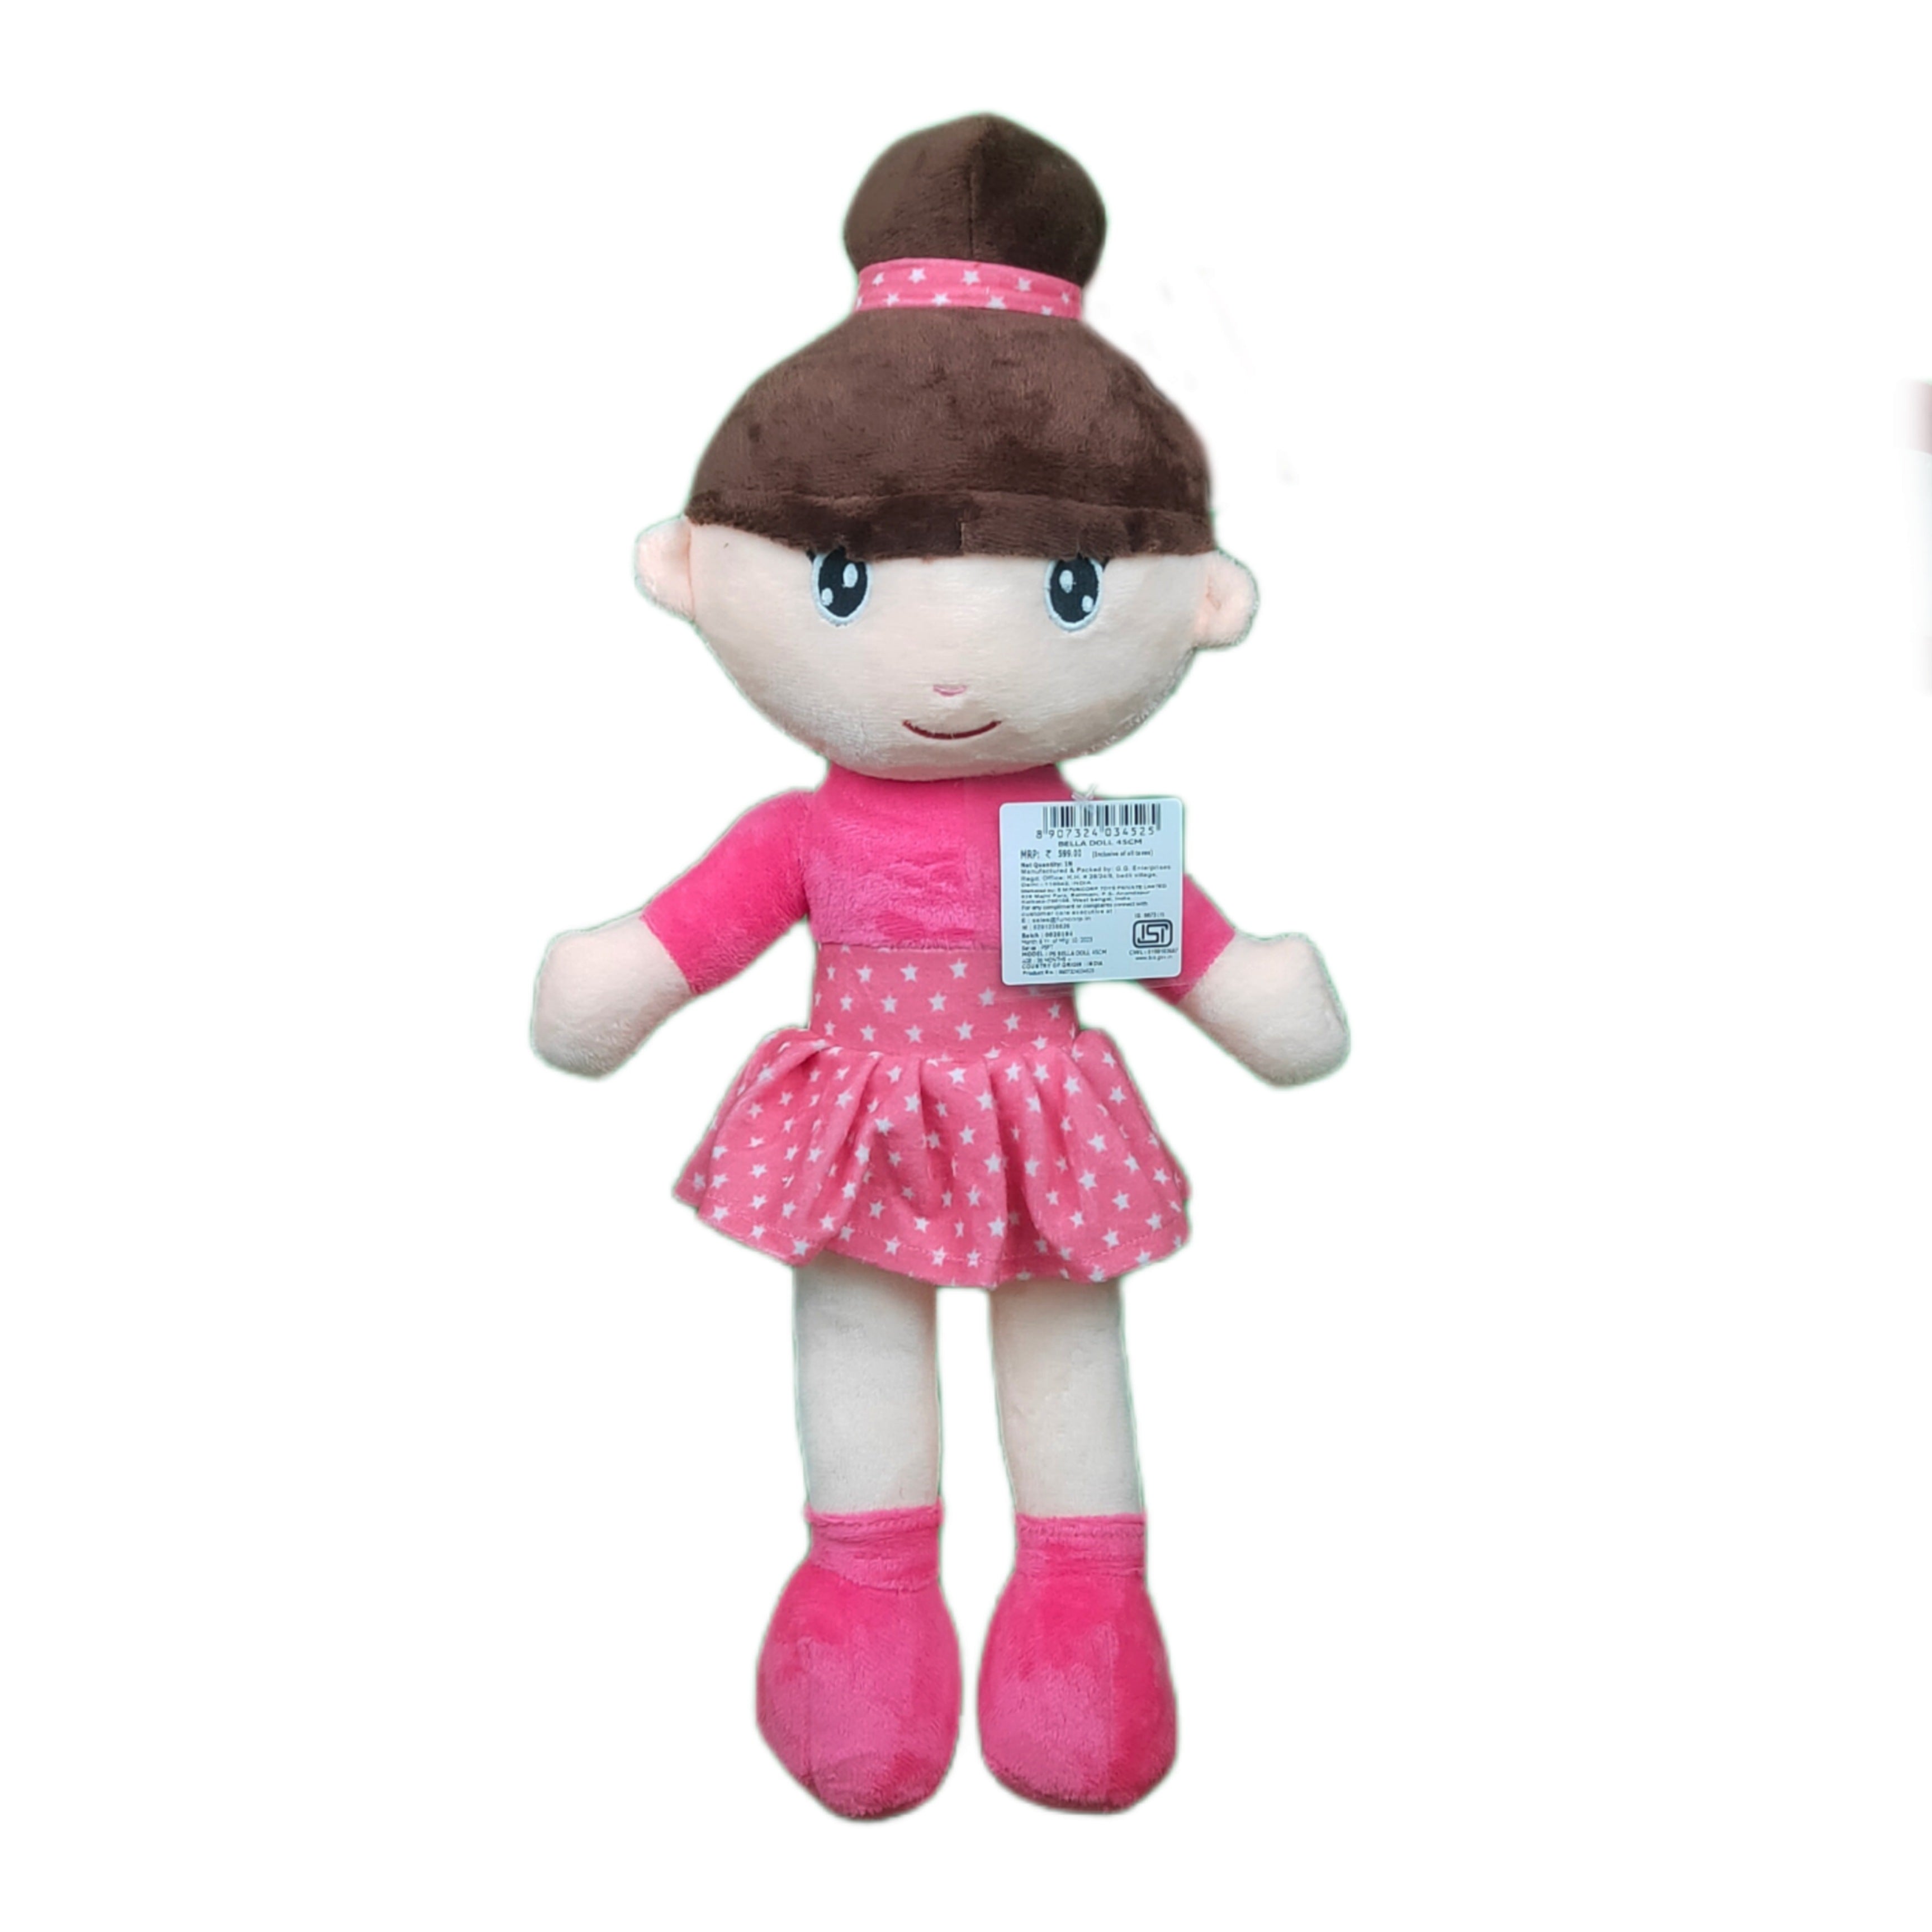 Play Hour Bella Rag Doll Plush Soft Toy Wearing Pink Polka Dot Frock for Ages 3 Years and Up, 45cm